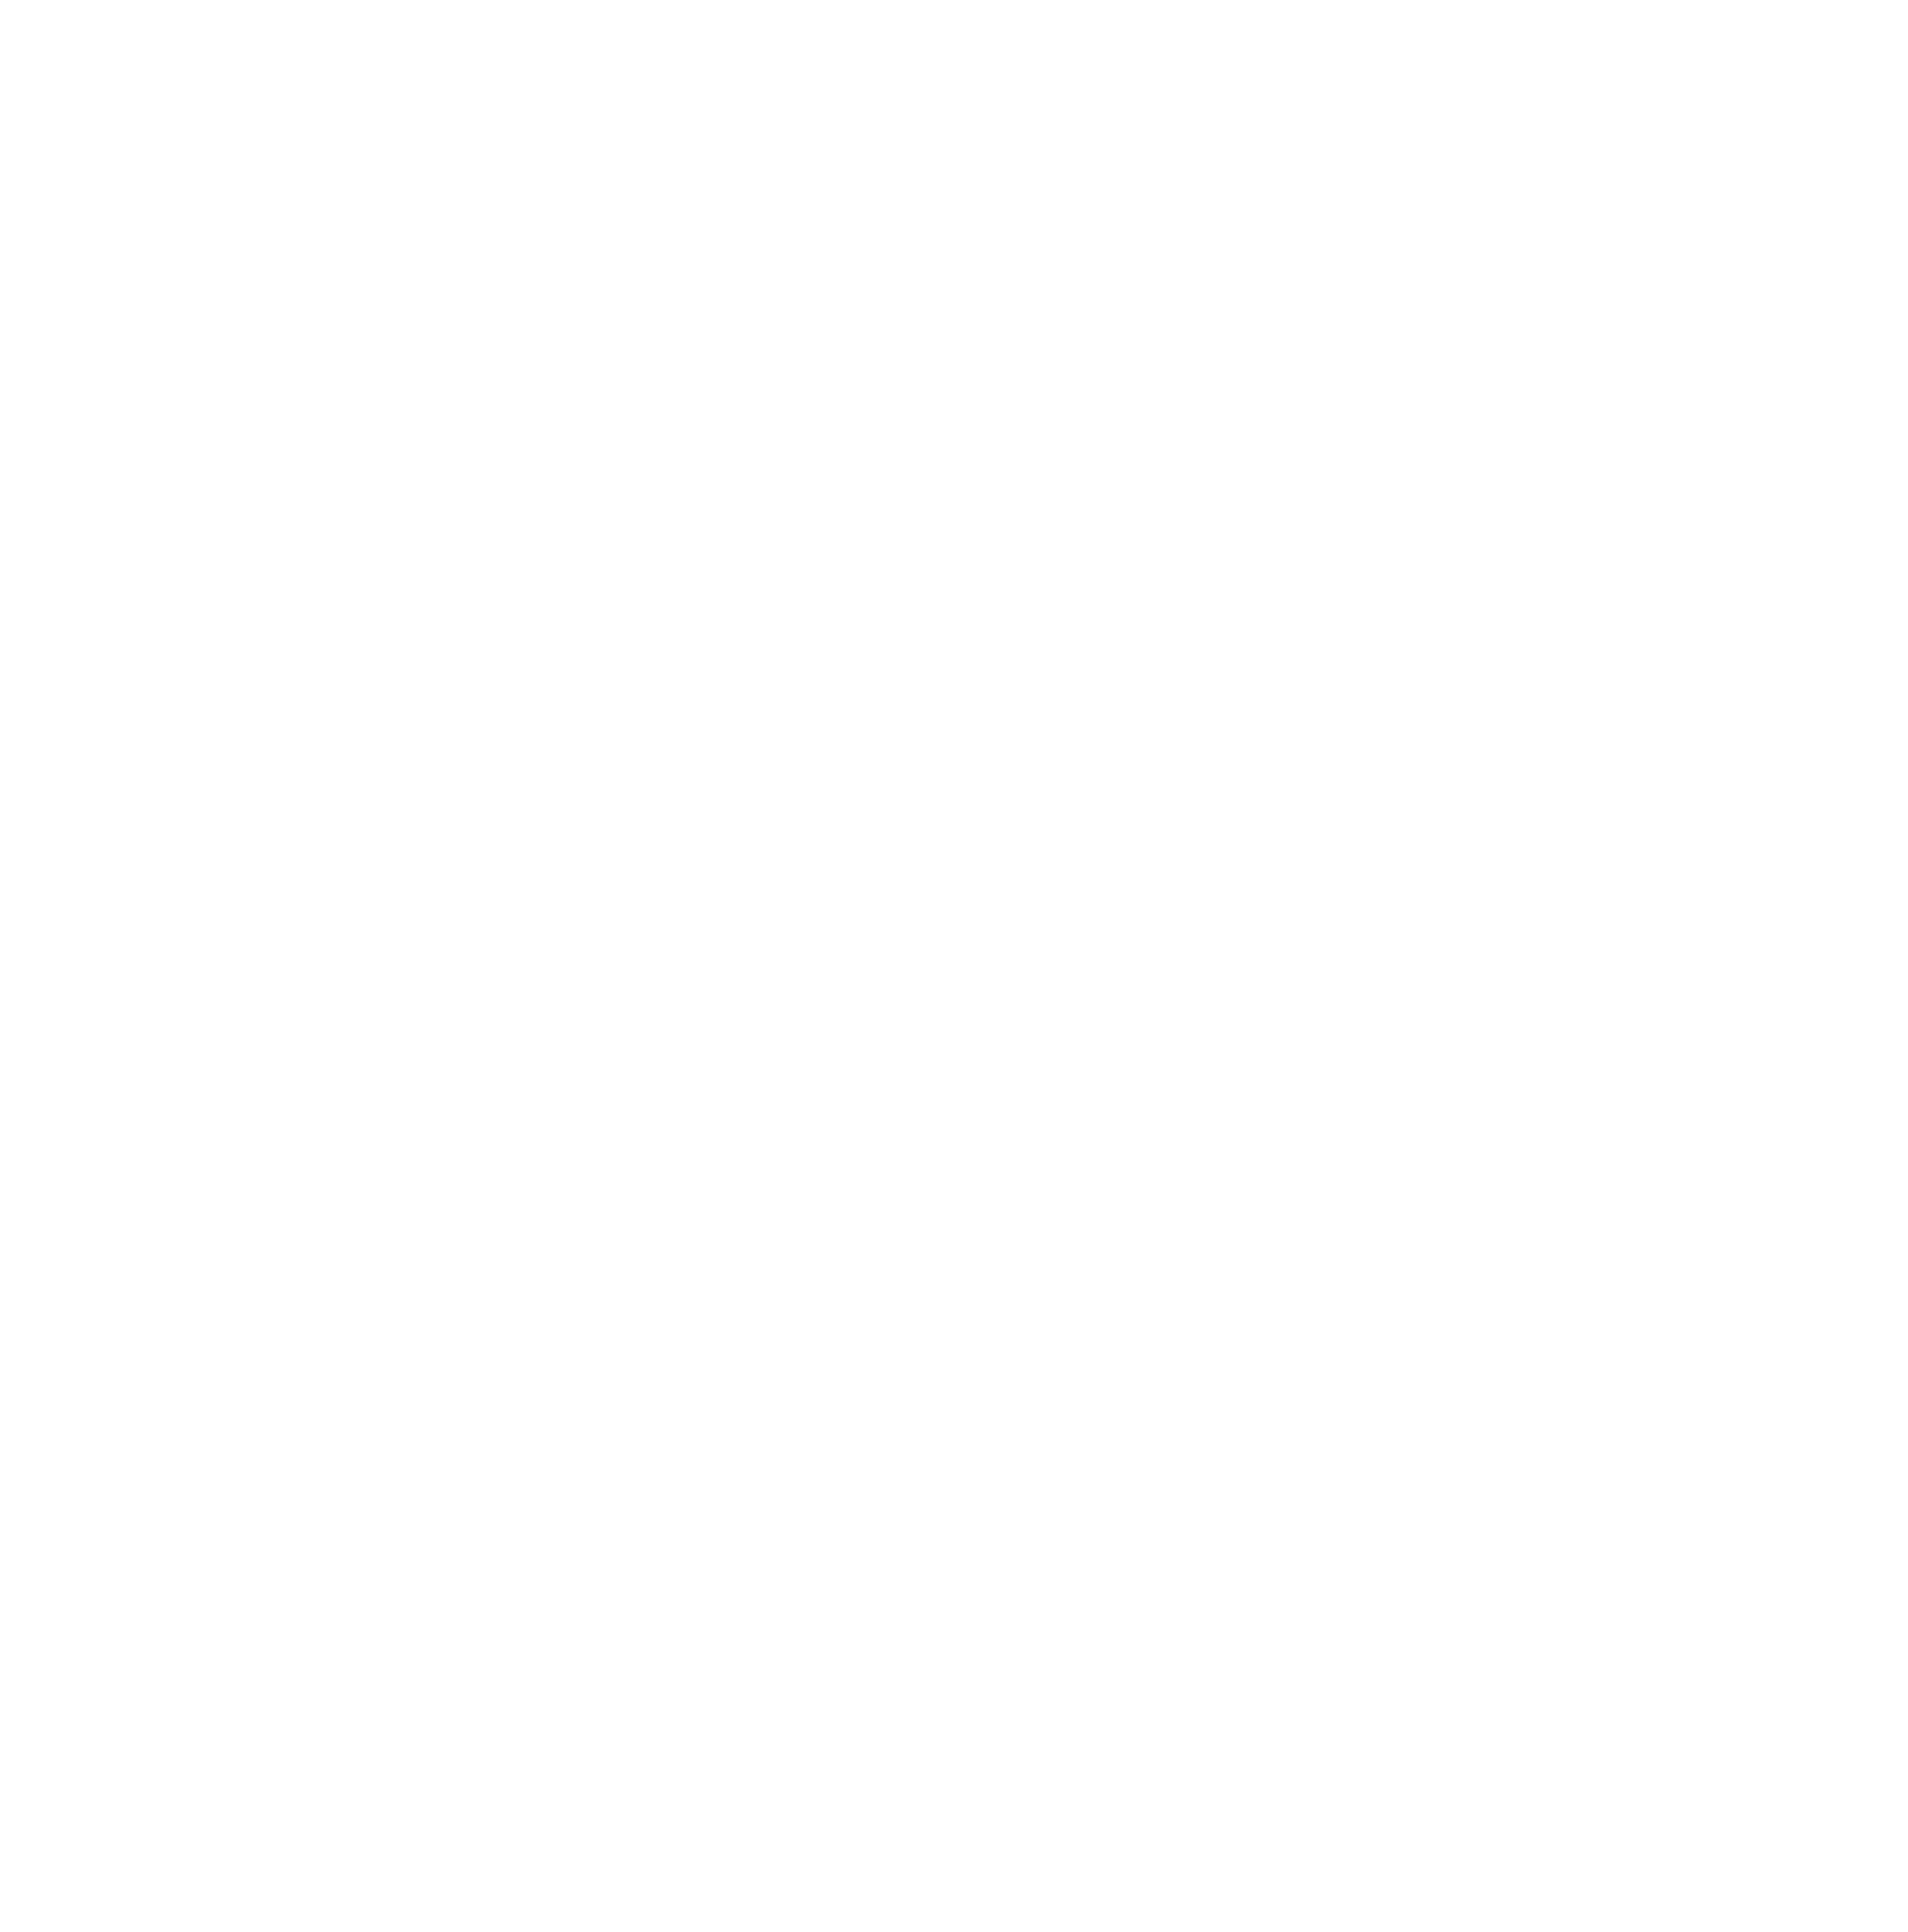 Free: Frame Circle Clipart - Round Frame Vector Png 